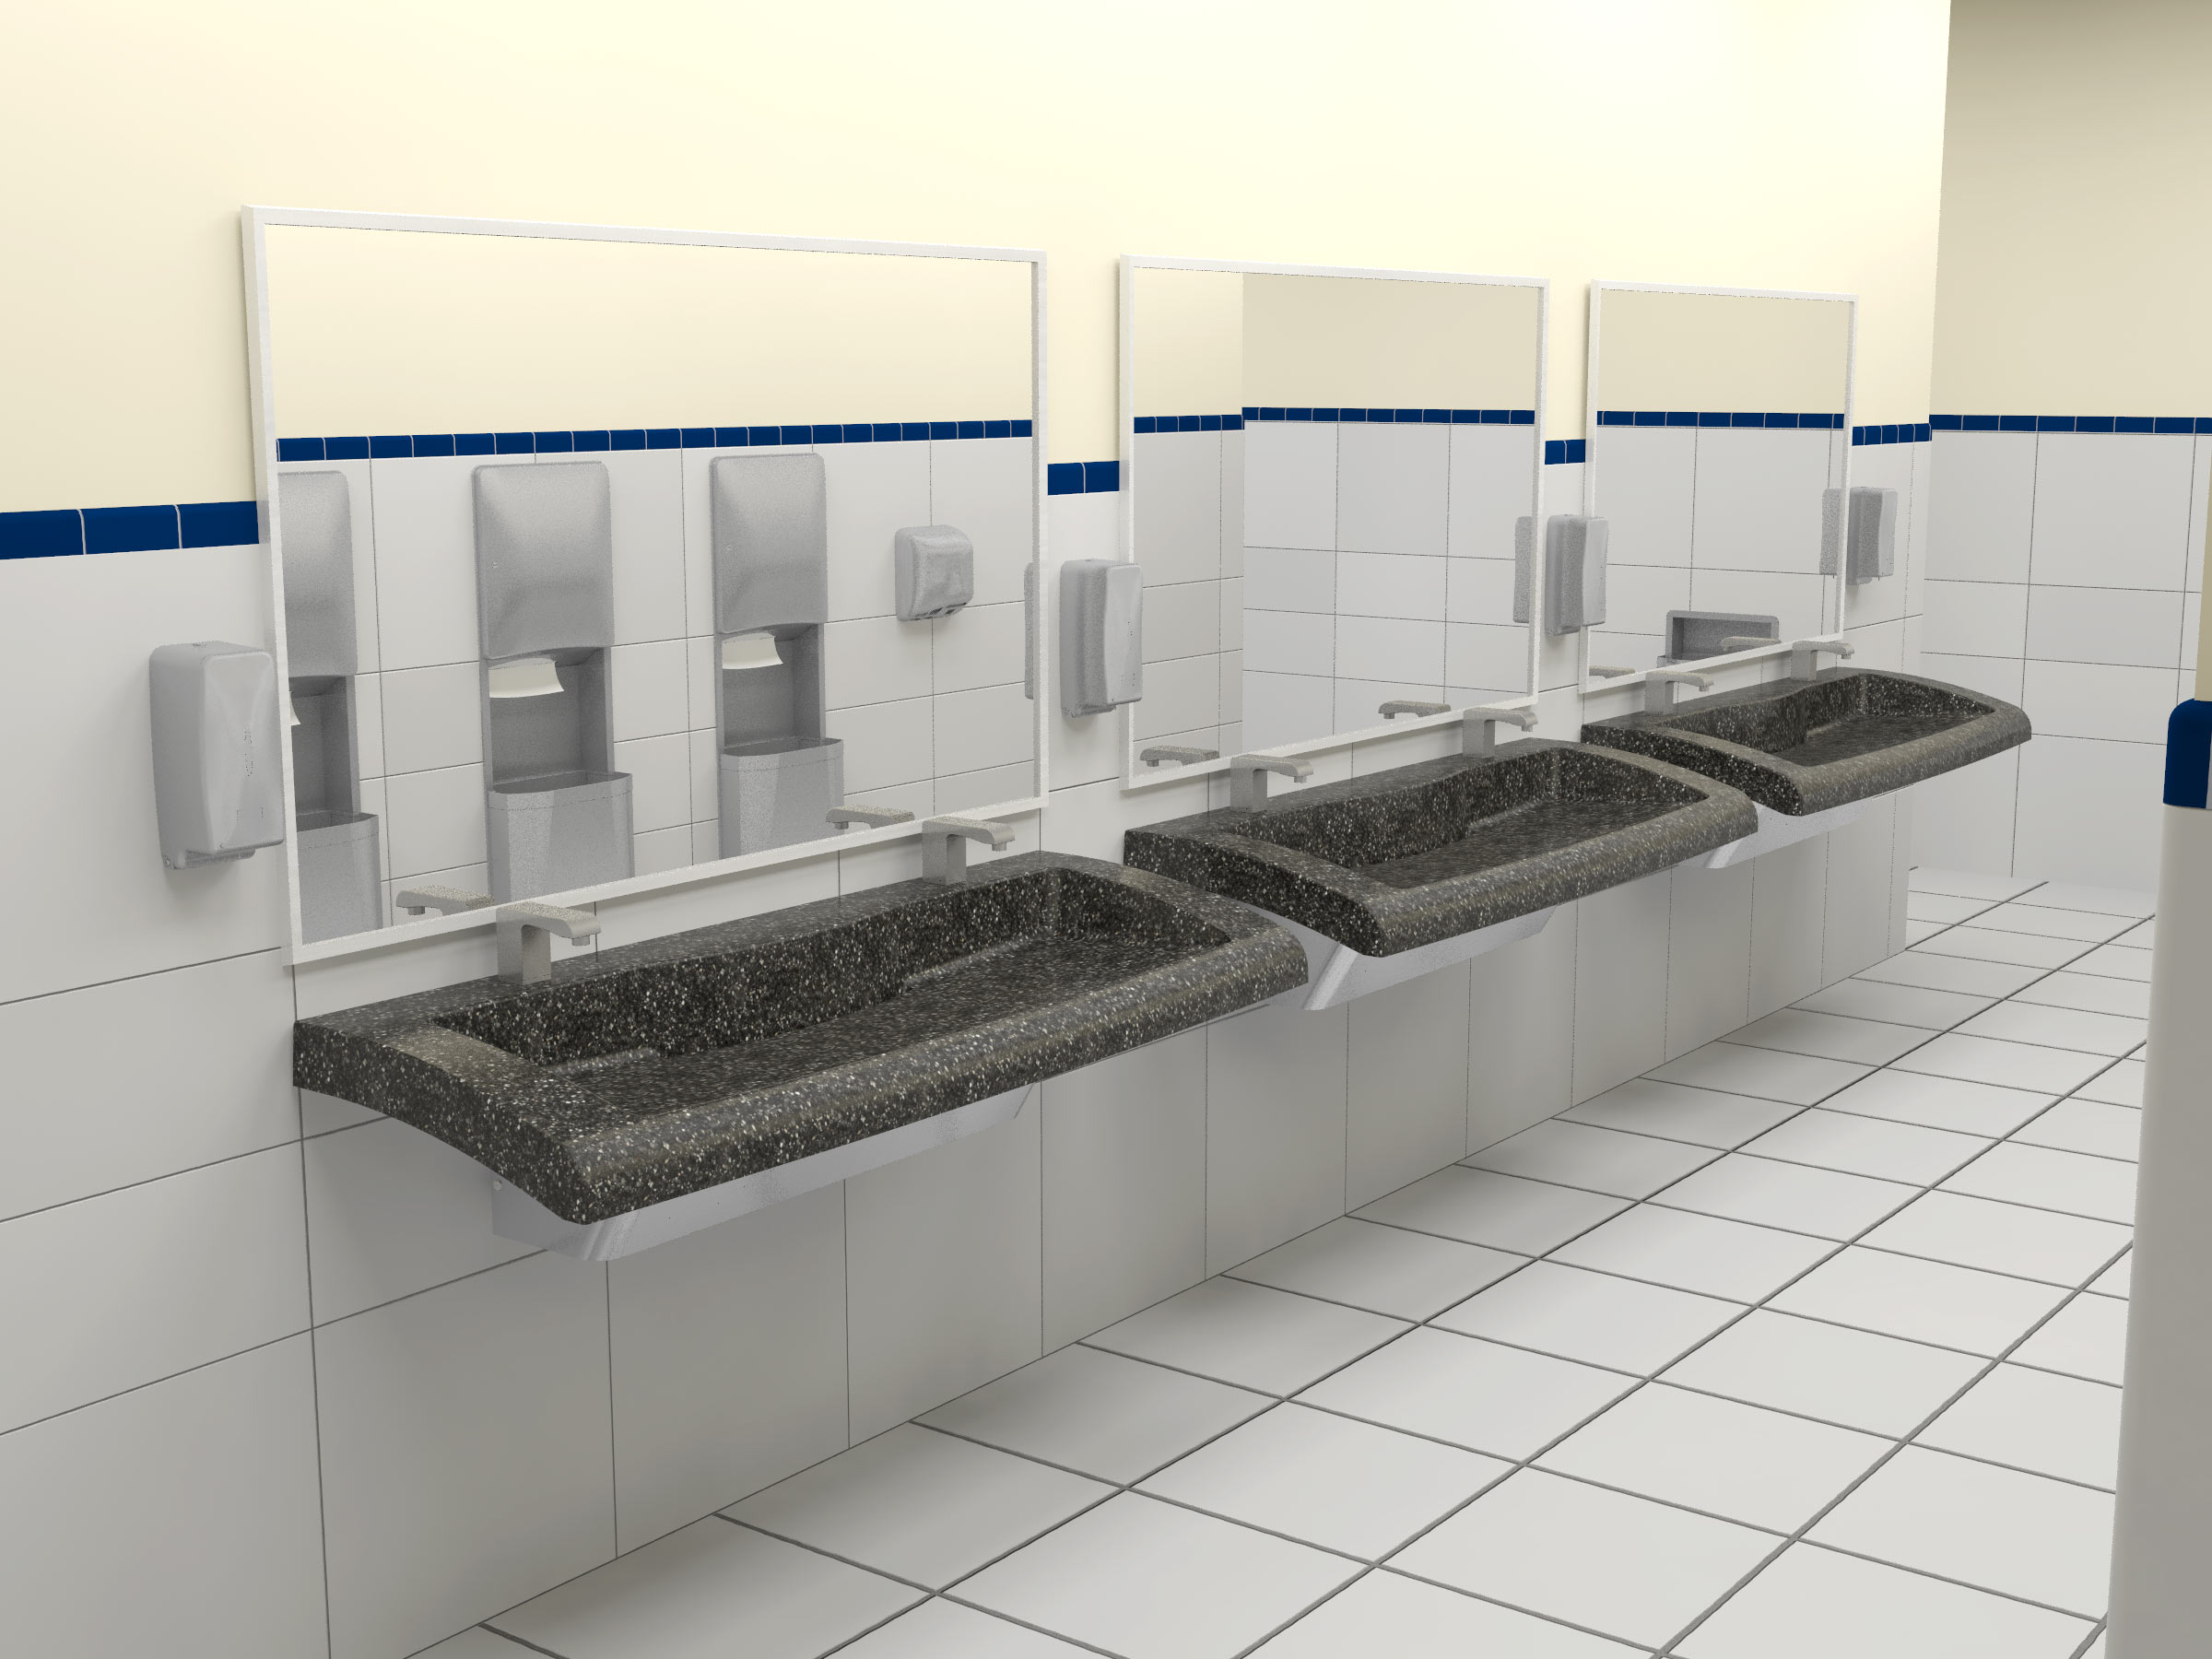 Airport bathroom featuring the Verge G-Series Lavatory system